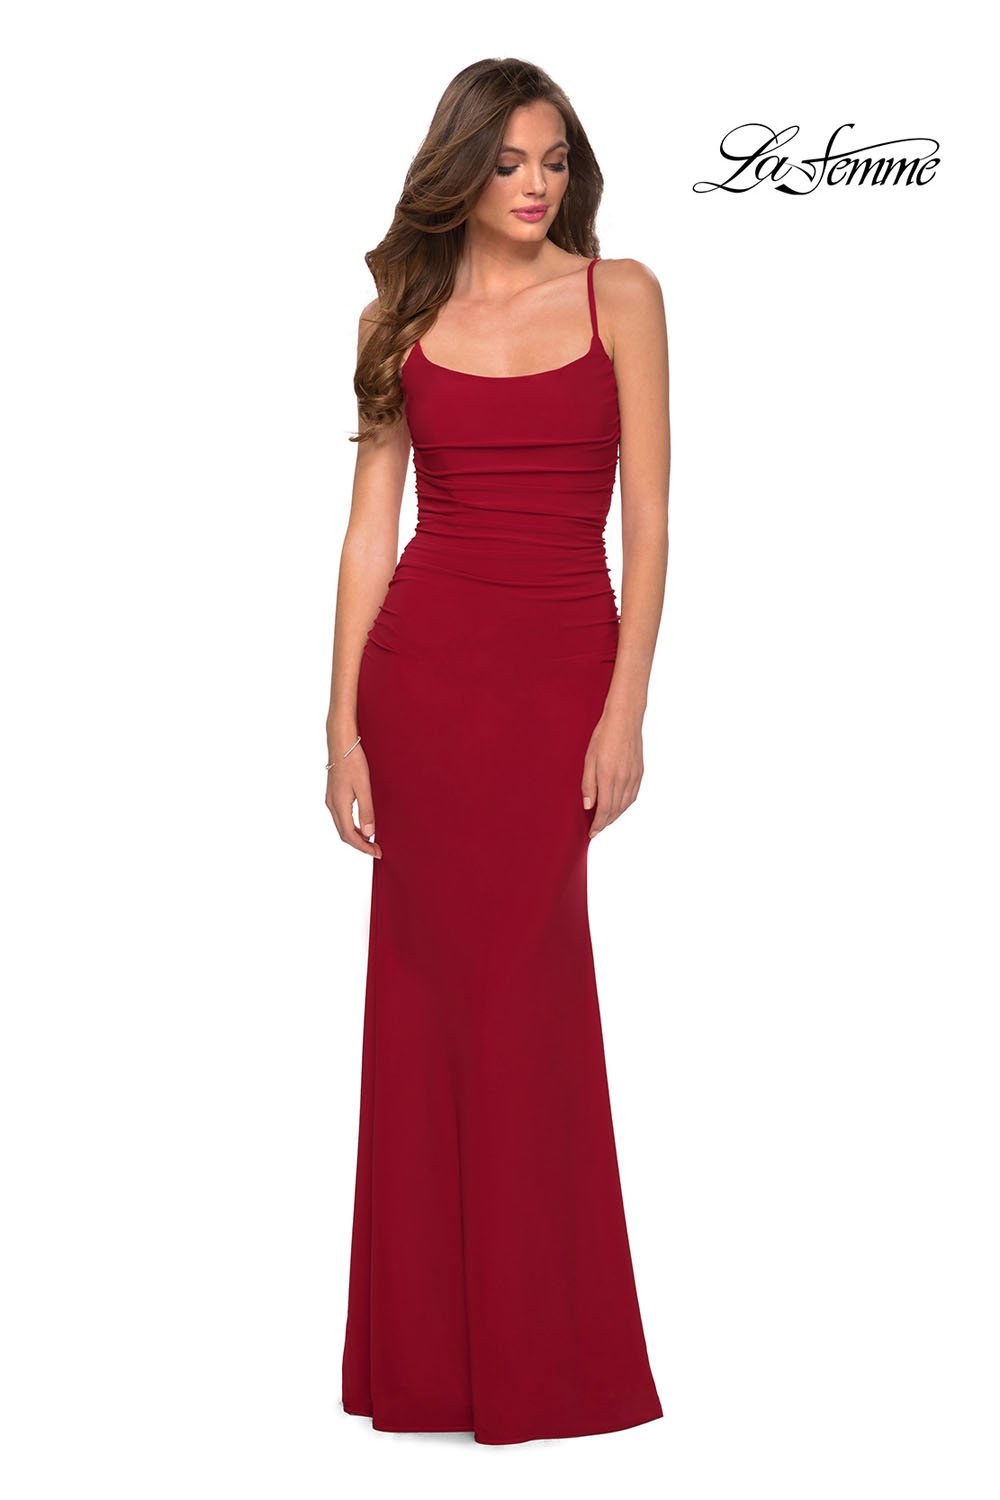 La Femme 29358 dress images in these colors: Black, Red.